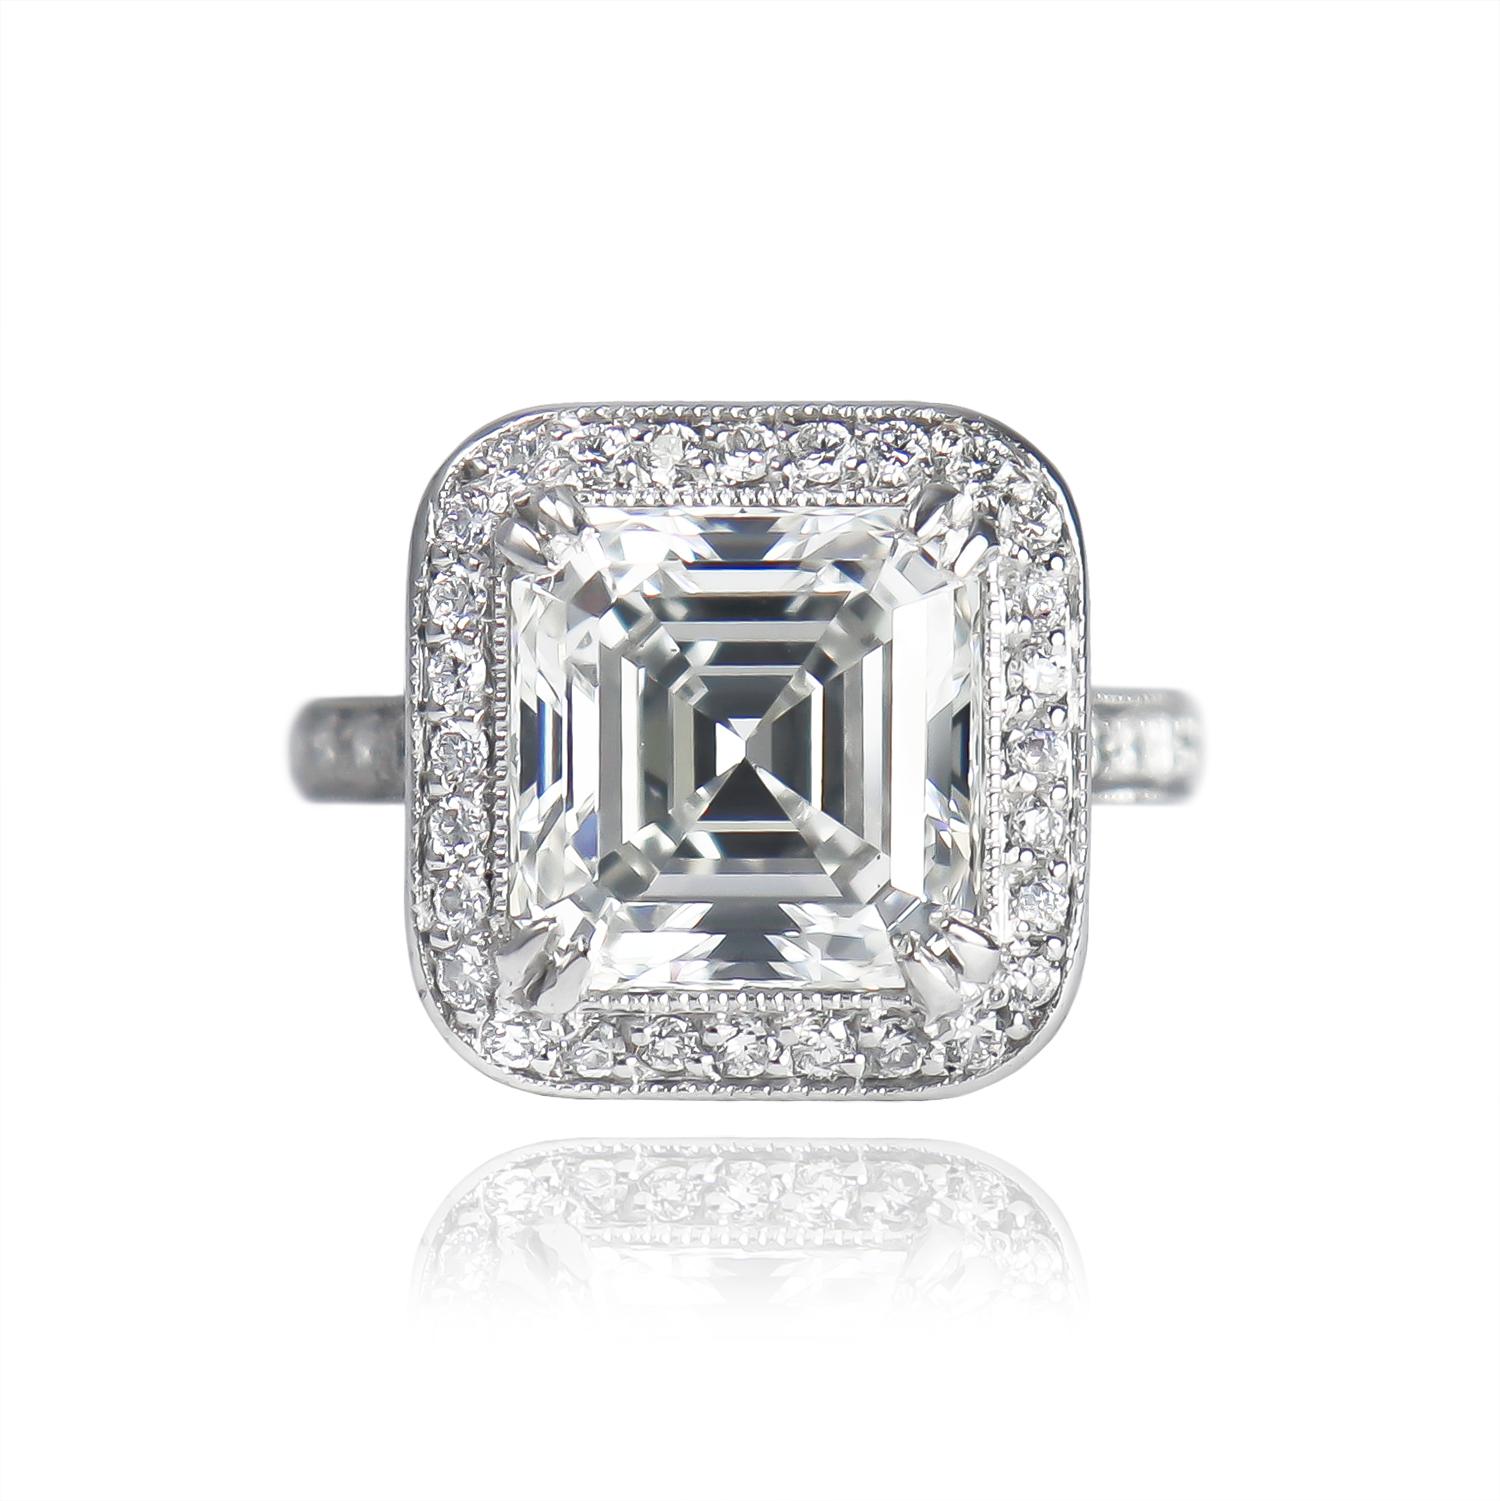 This beautiful, recently  purveyed ring features a GIA certified 5.20 carat Asscher cut diamond of H color and VS2 clarity as described by GIA grading report #15040716. Set in a platinum, bright-cut pavé ring with milgrain details, this piece is a